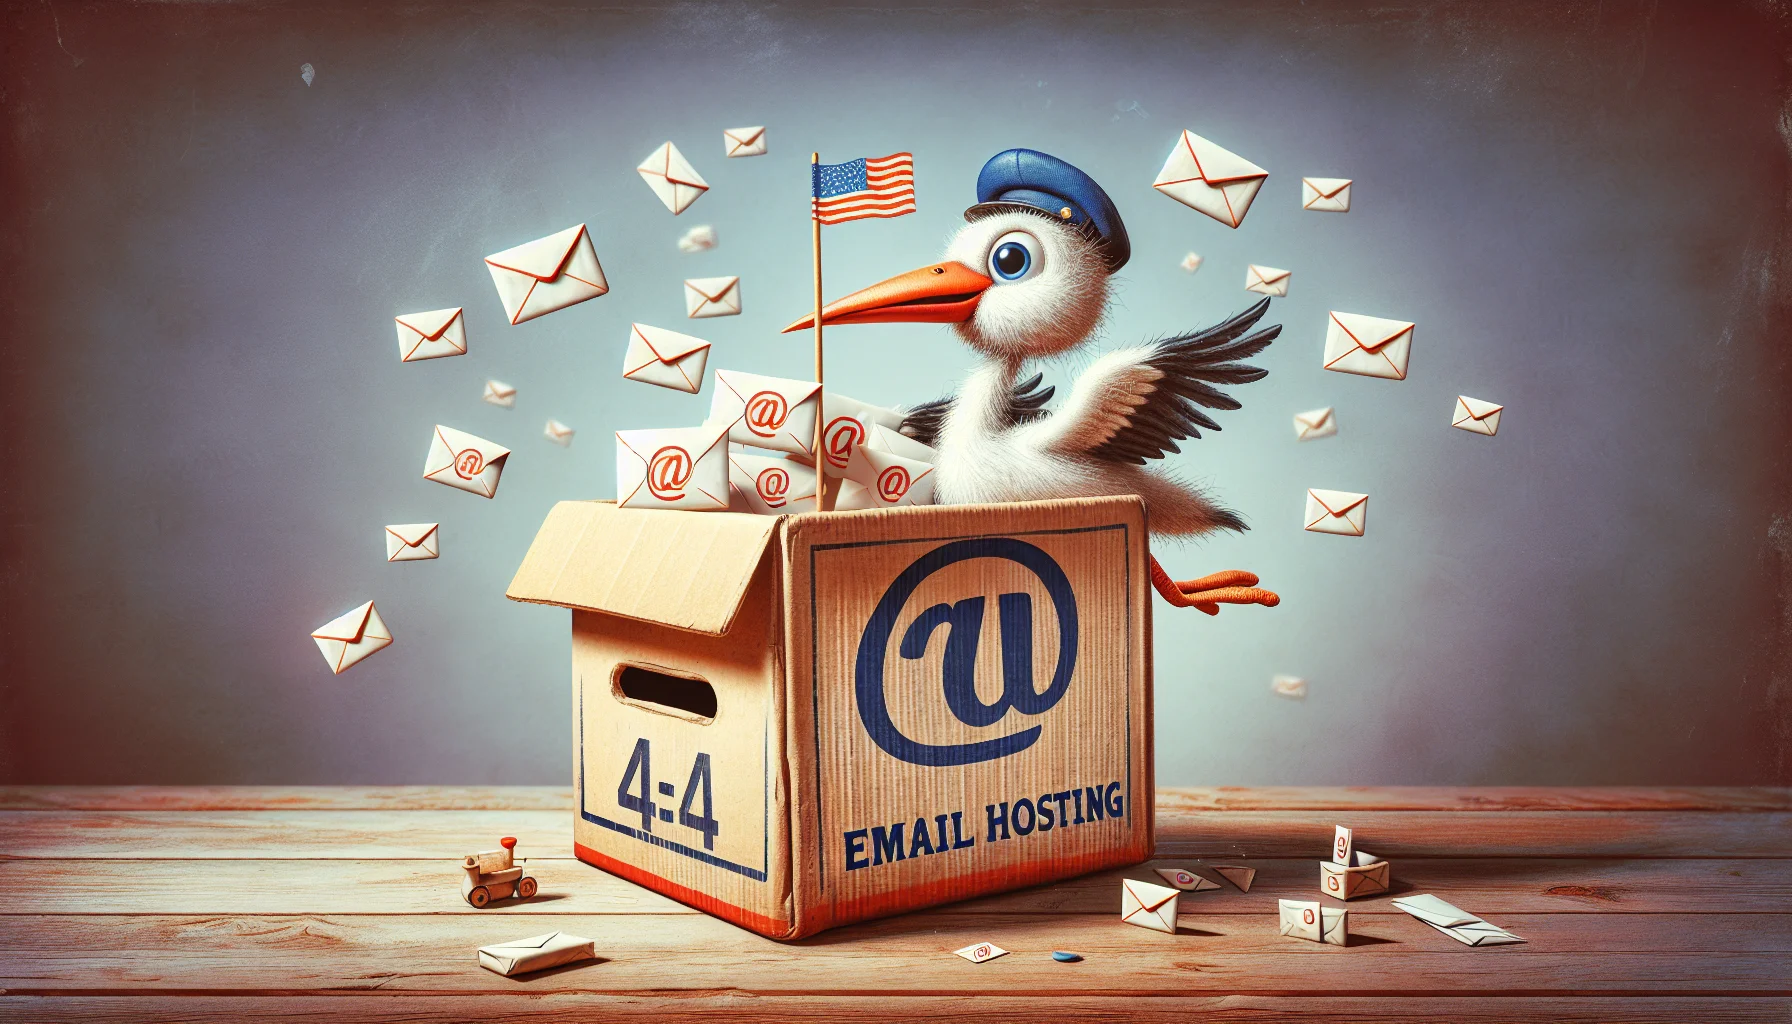 Create a humorous image that depicts the concept of email hosting. A cardboard box painted to look like a traditional post office, complete with a flag and front slot, sits on a wooden desk. In the box, visible through the slot, are several small envelopes with '@' symbols on them, representing digital emails. A cuddly caricature of a stork is struggling to lift the box, its comical expression showing determination, indicating the delivery of these web services. Small, playful icons and symbols associated with web hosting are scattered around the scene, adding an element of fun and sprightly appeal.